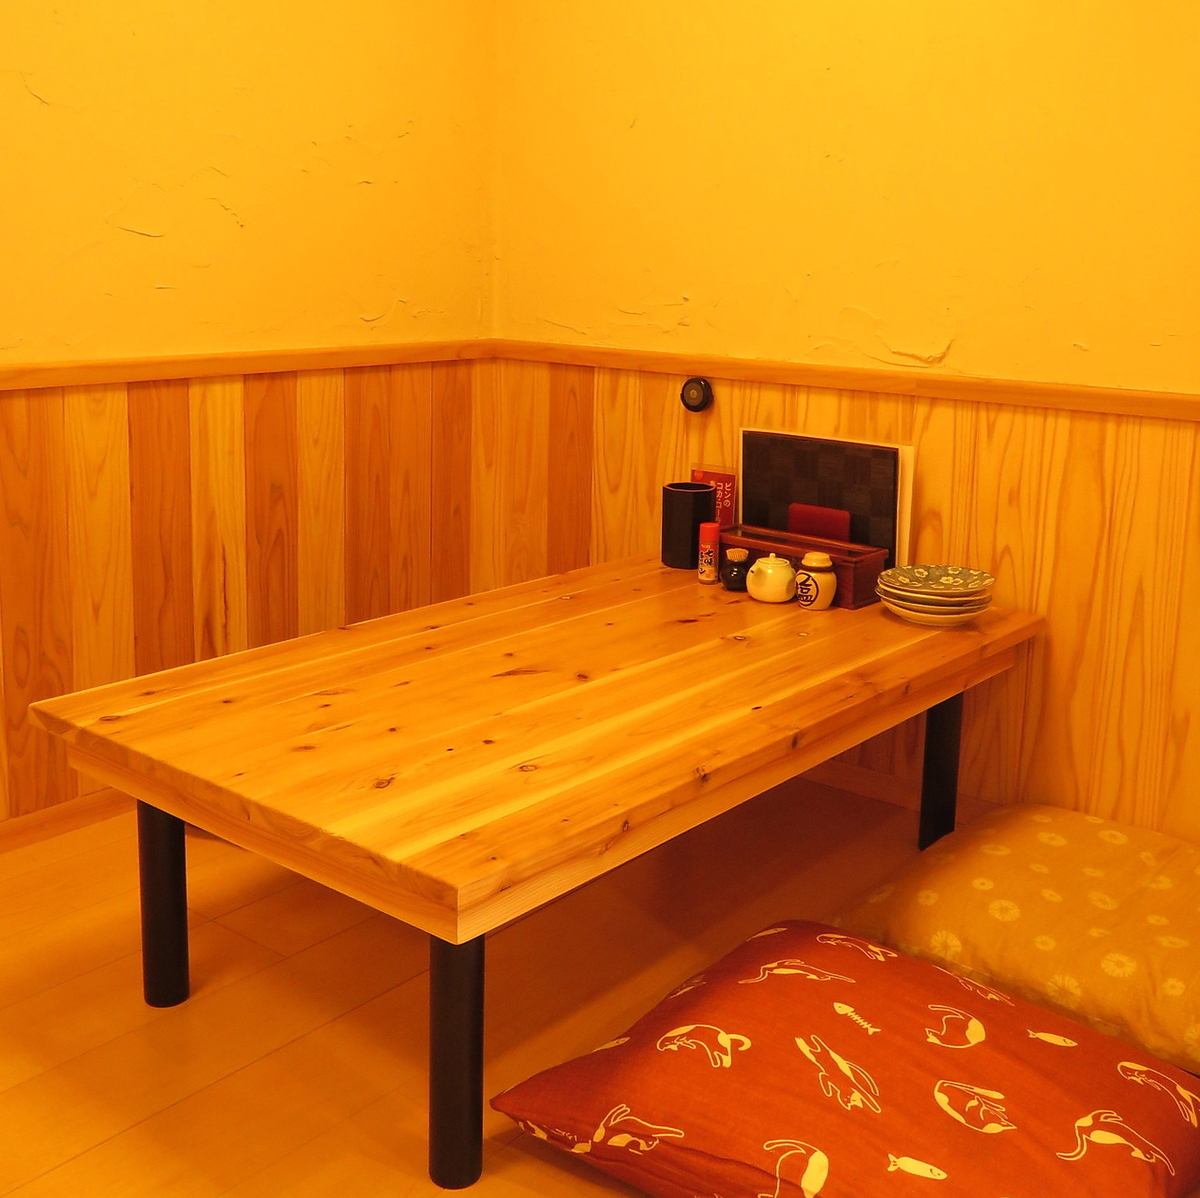 We also have semi-private rooms where you can enjoy yourself without worrying about your surroundings.